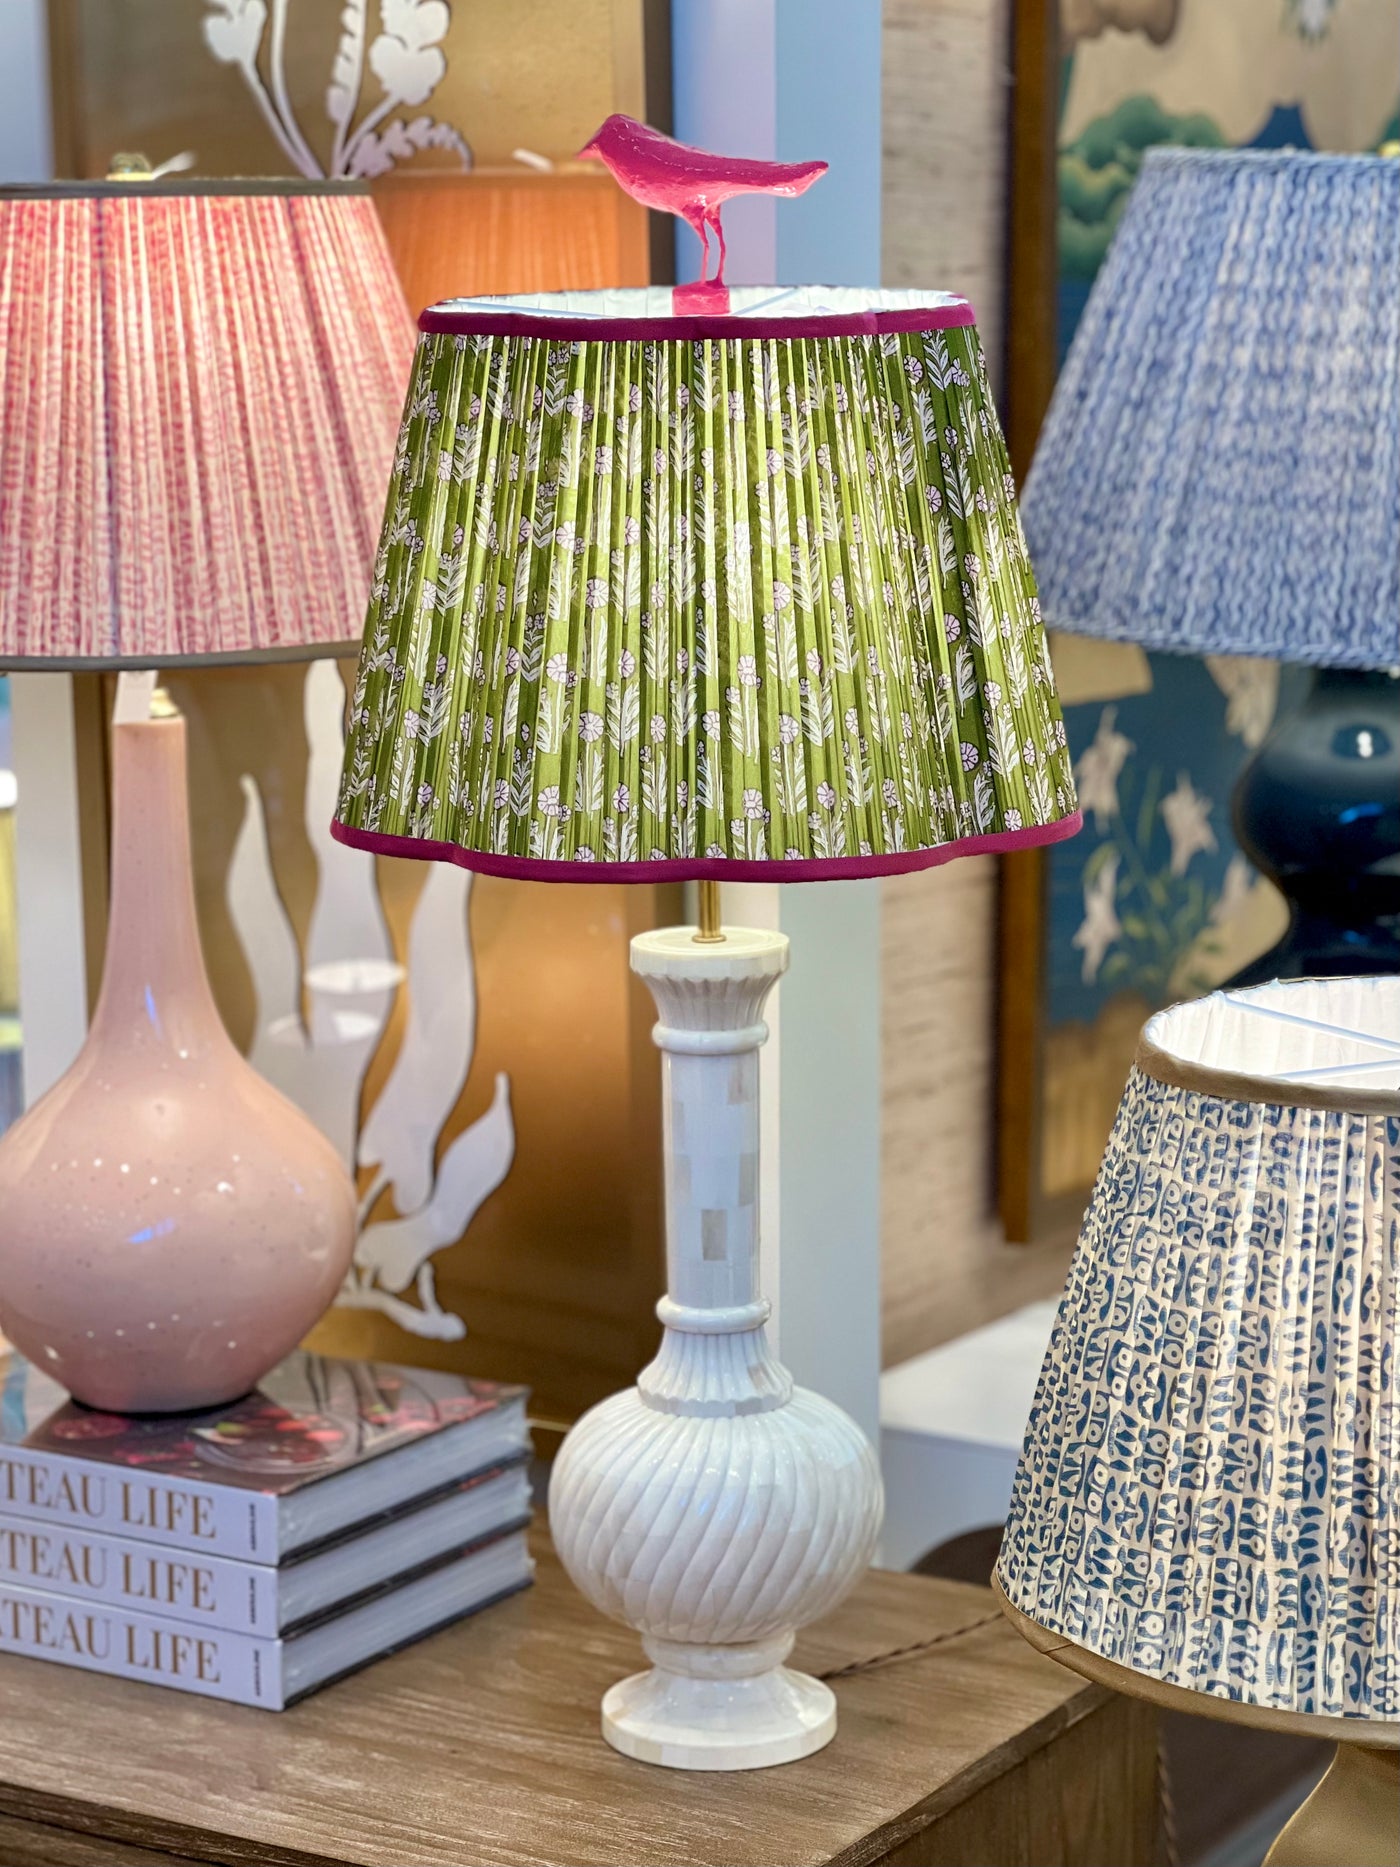 Penny Morrison Lampshade and Lamp with a pink bird finial